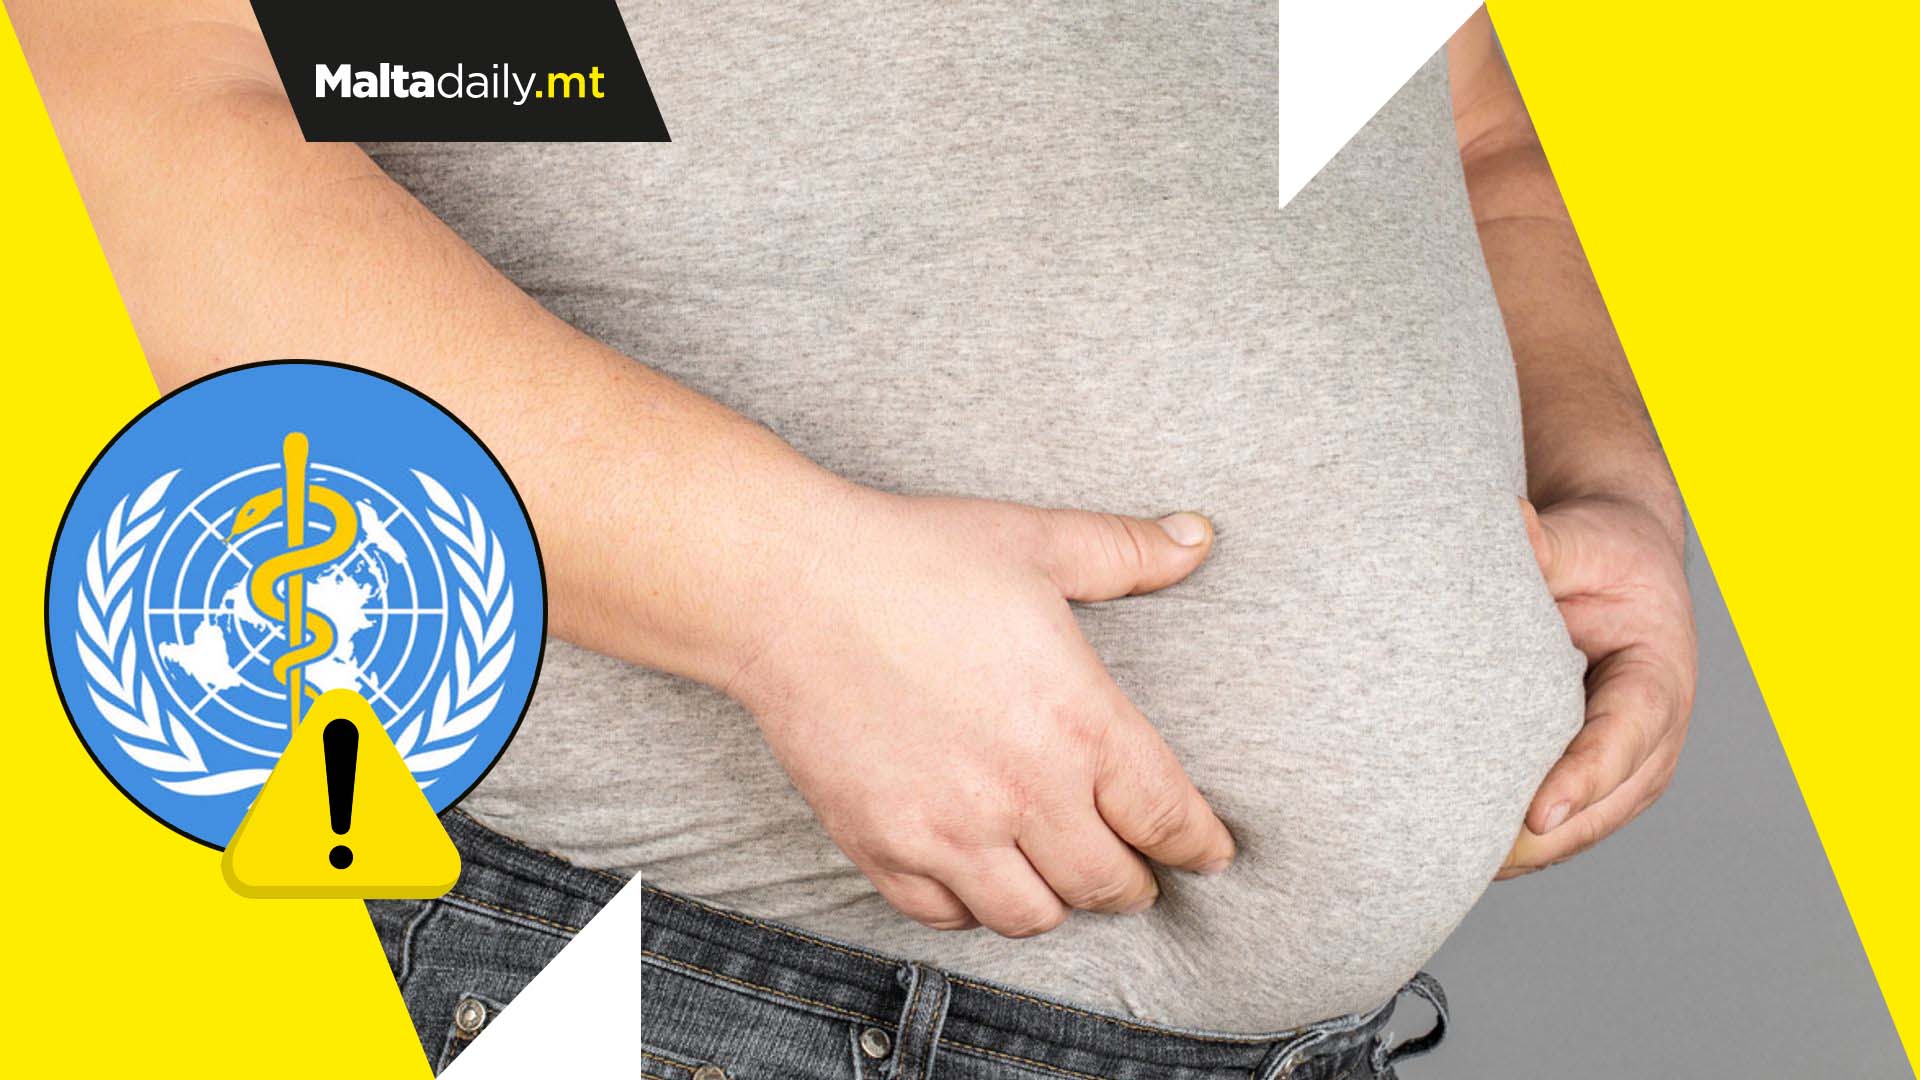 Obesity epidemic killing 1.2 million yearly in Europe warns WHO